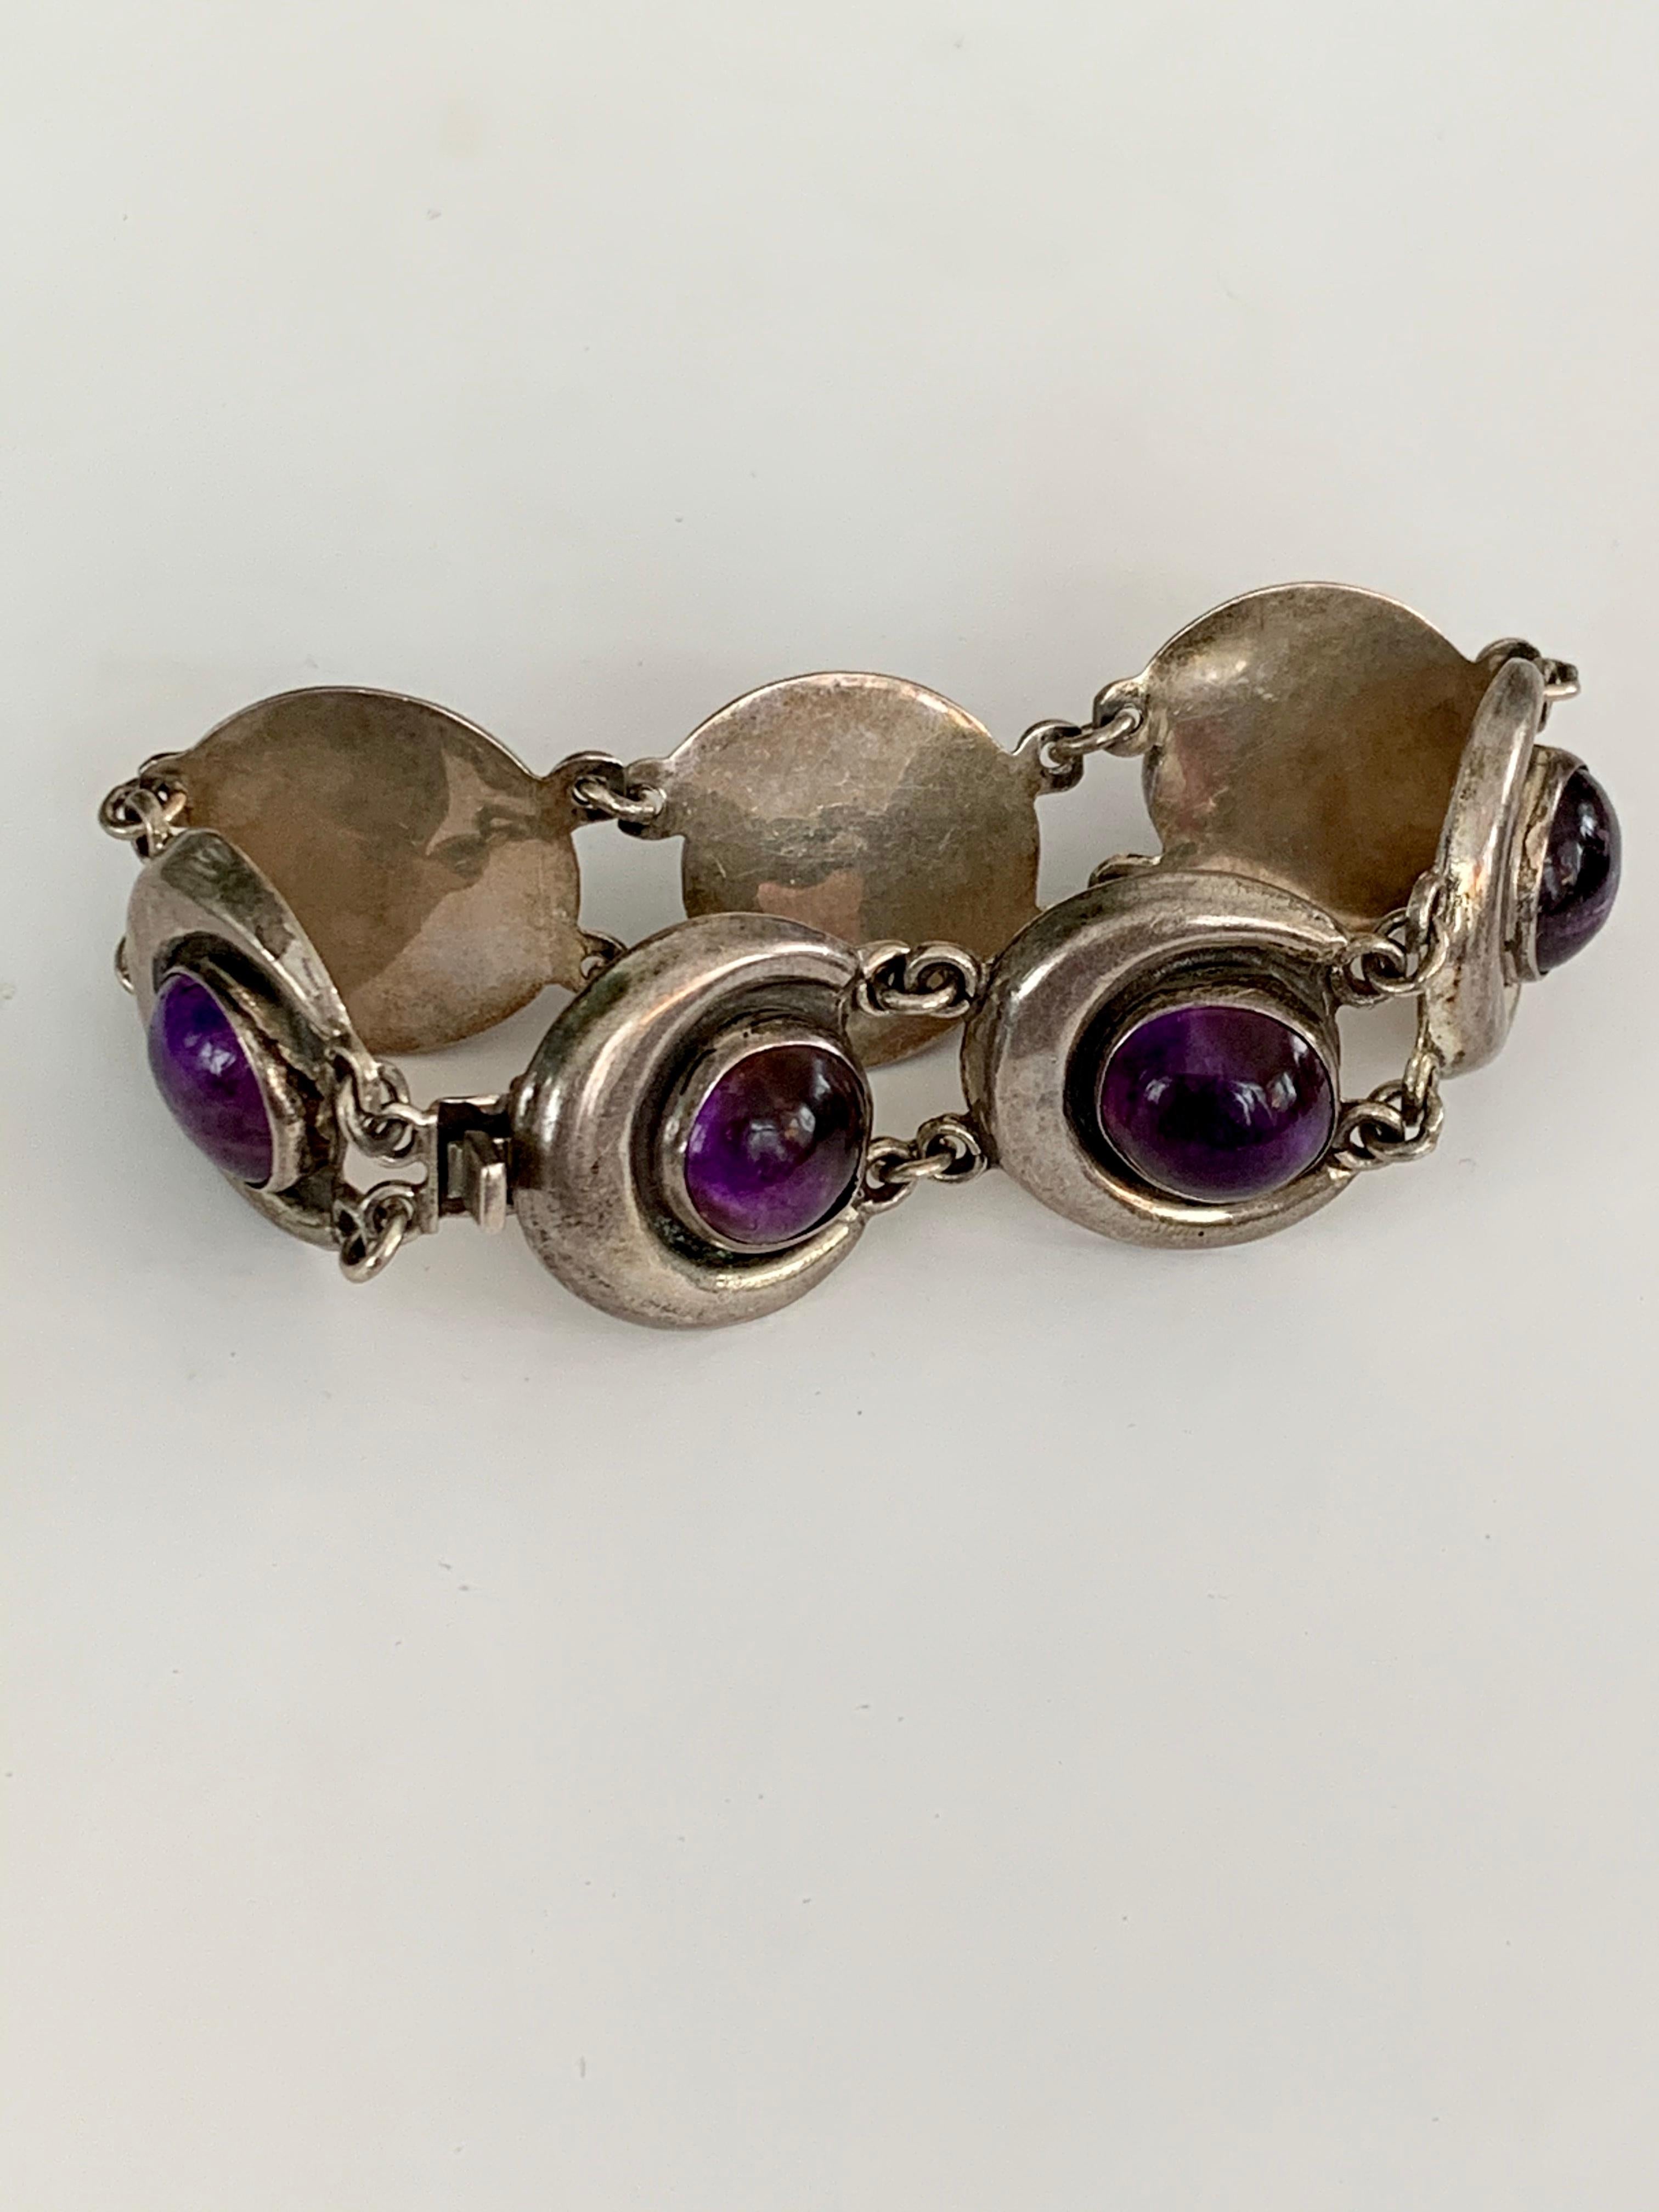 This vintage FARFAN Mexican Silver bracelet features seven cabochon Amethyst stones; one per link.  Each Amethyst is 1/2